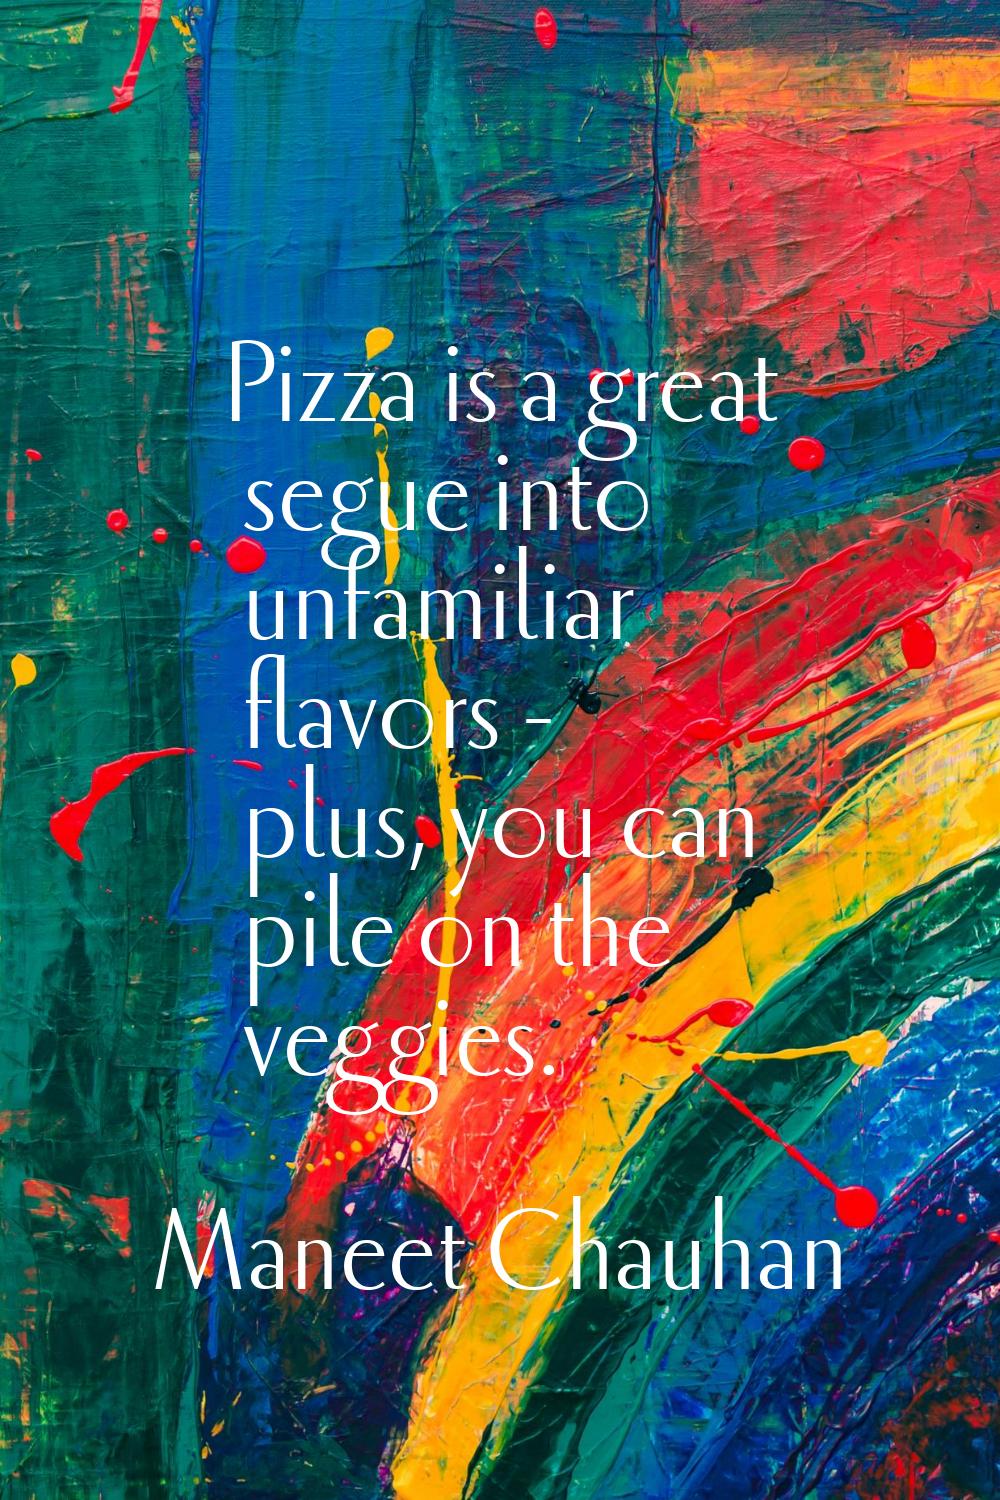 Pizza is a great segue into unfamiliar flavors - plus, you can pile on the veggies.